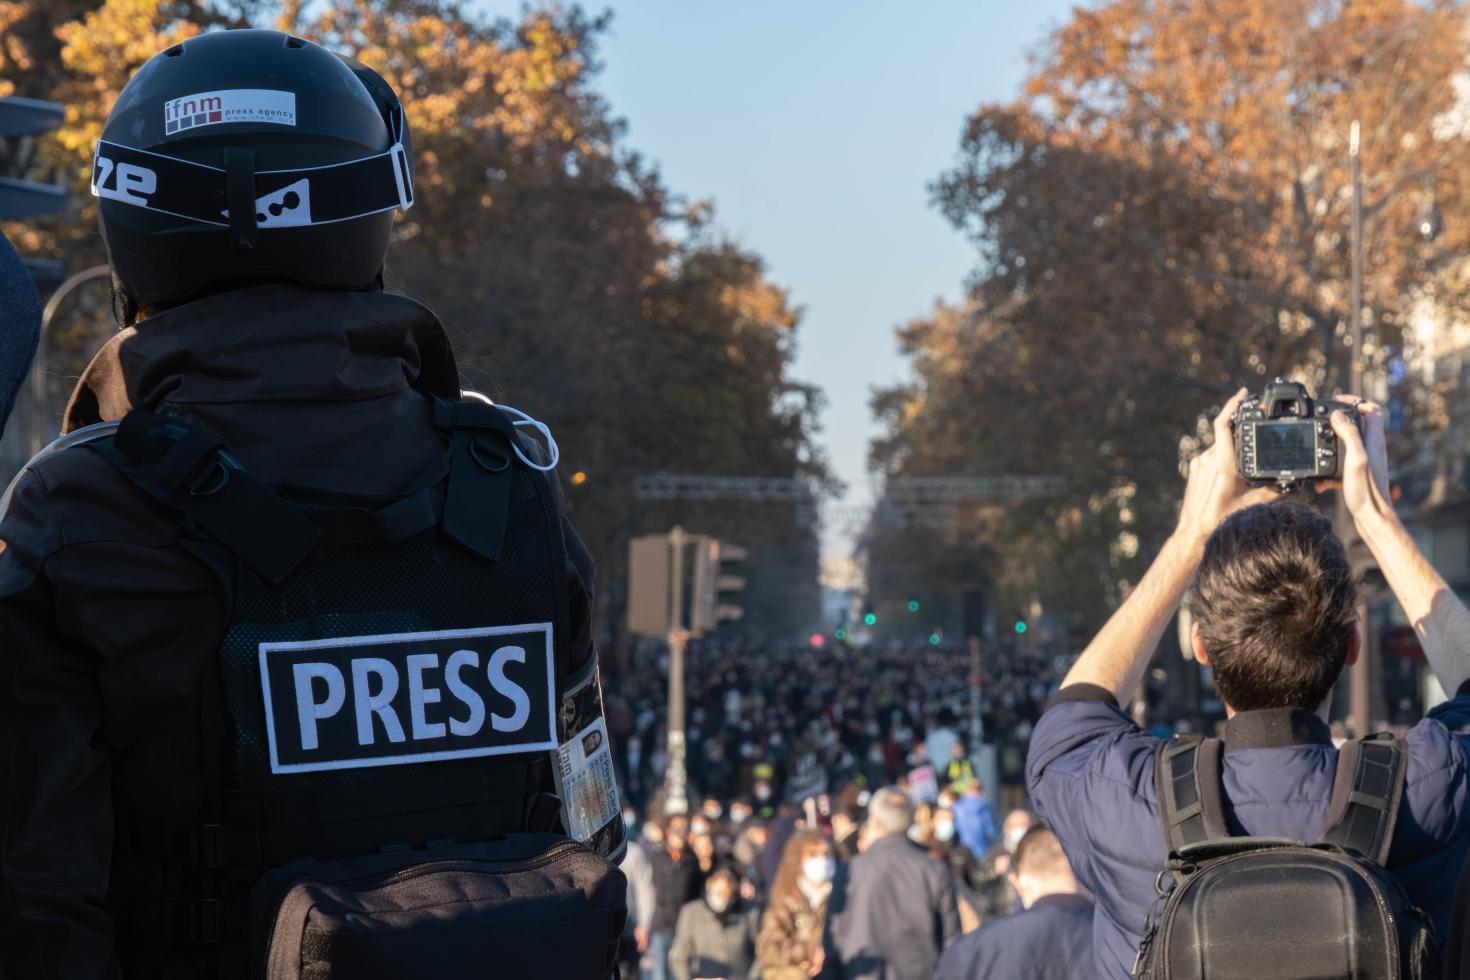 Journalists covering protest: by Tact hill